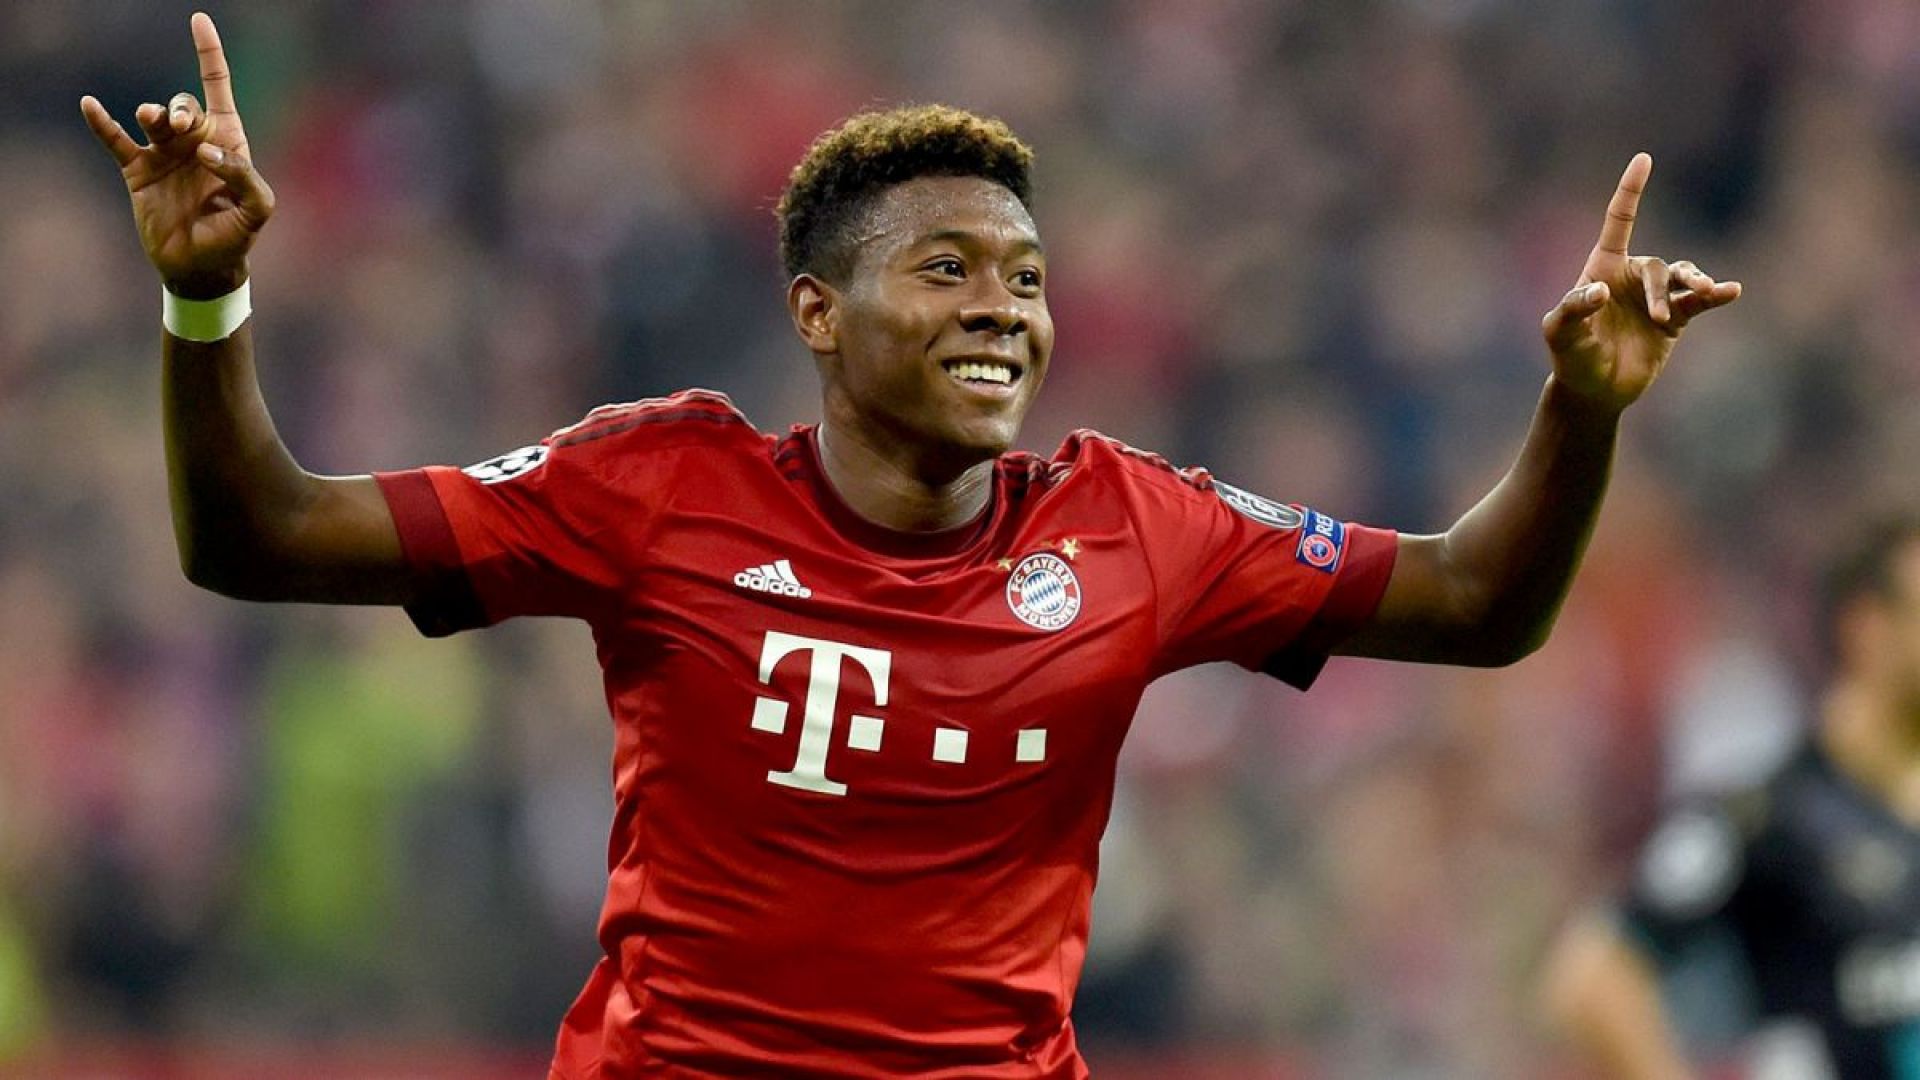 Manchester United appear to be out of the race for David Alaba who is closing in on a move to Real Madrid.